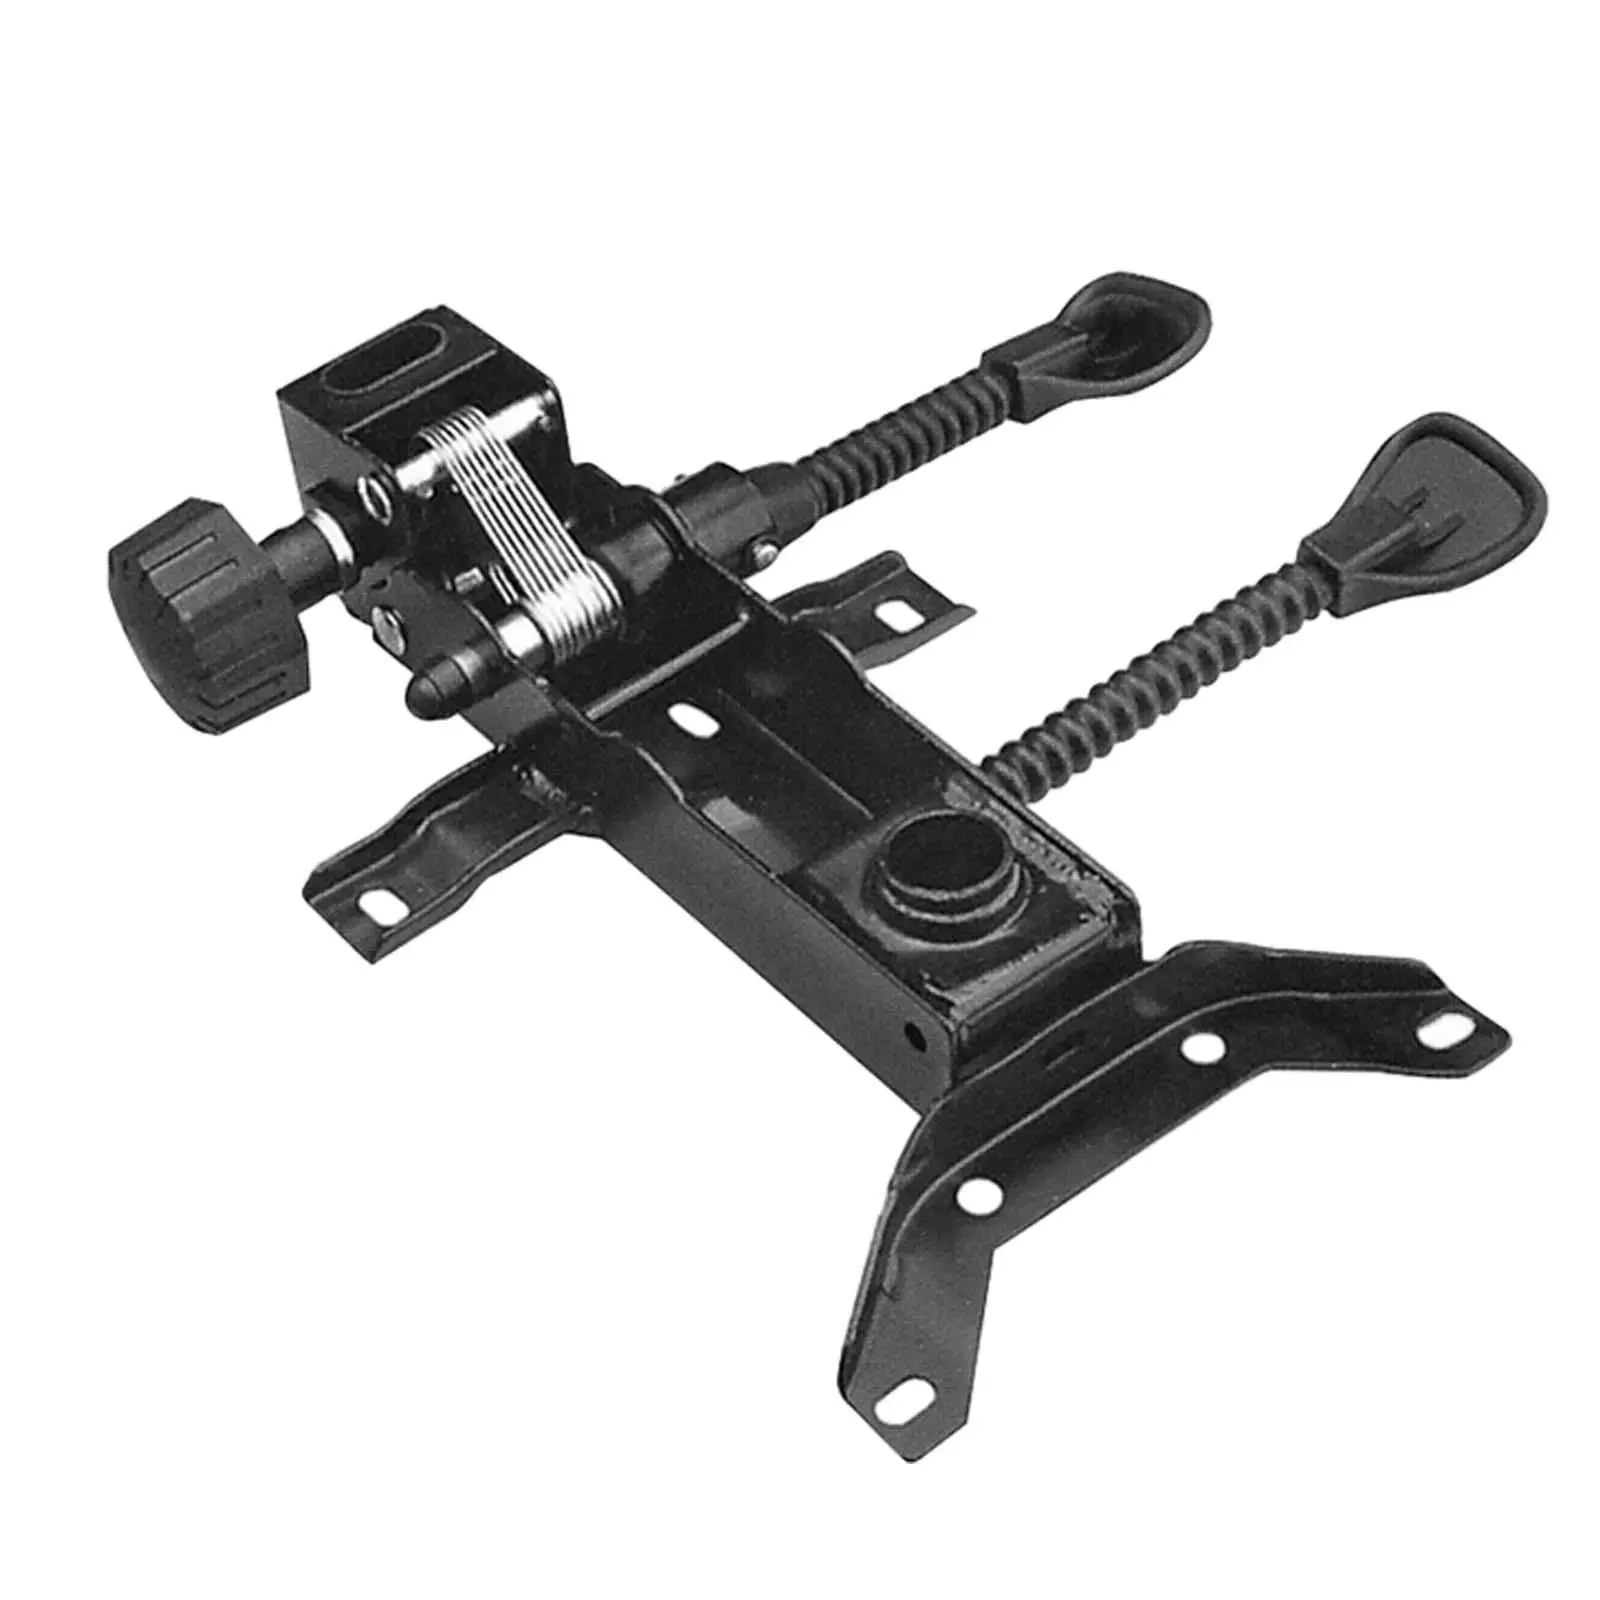 Replacement Office Chair Tilt and Lock Lever Base Plate Office Chair Tilt Control Mechanism for Furniture Bar Stool Desk Chairs